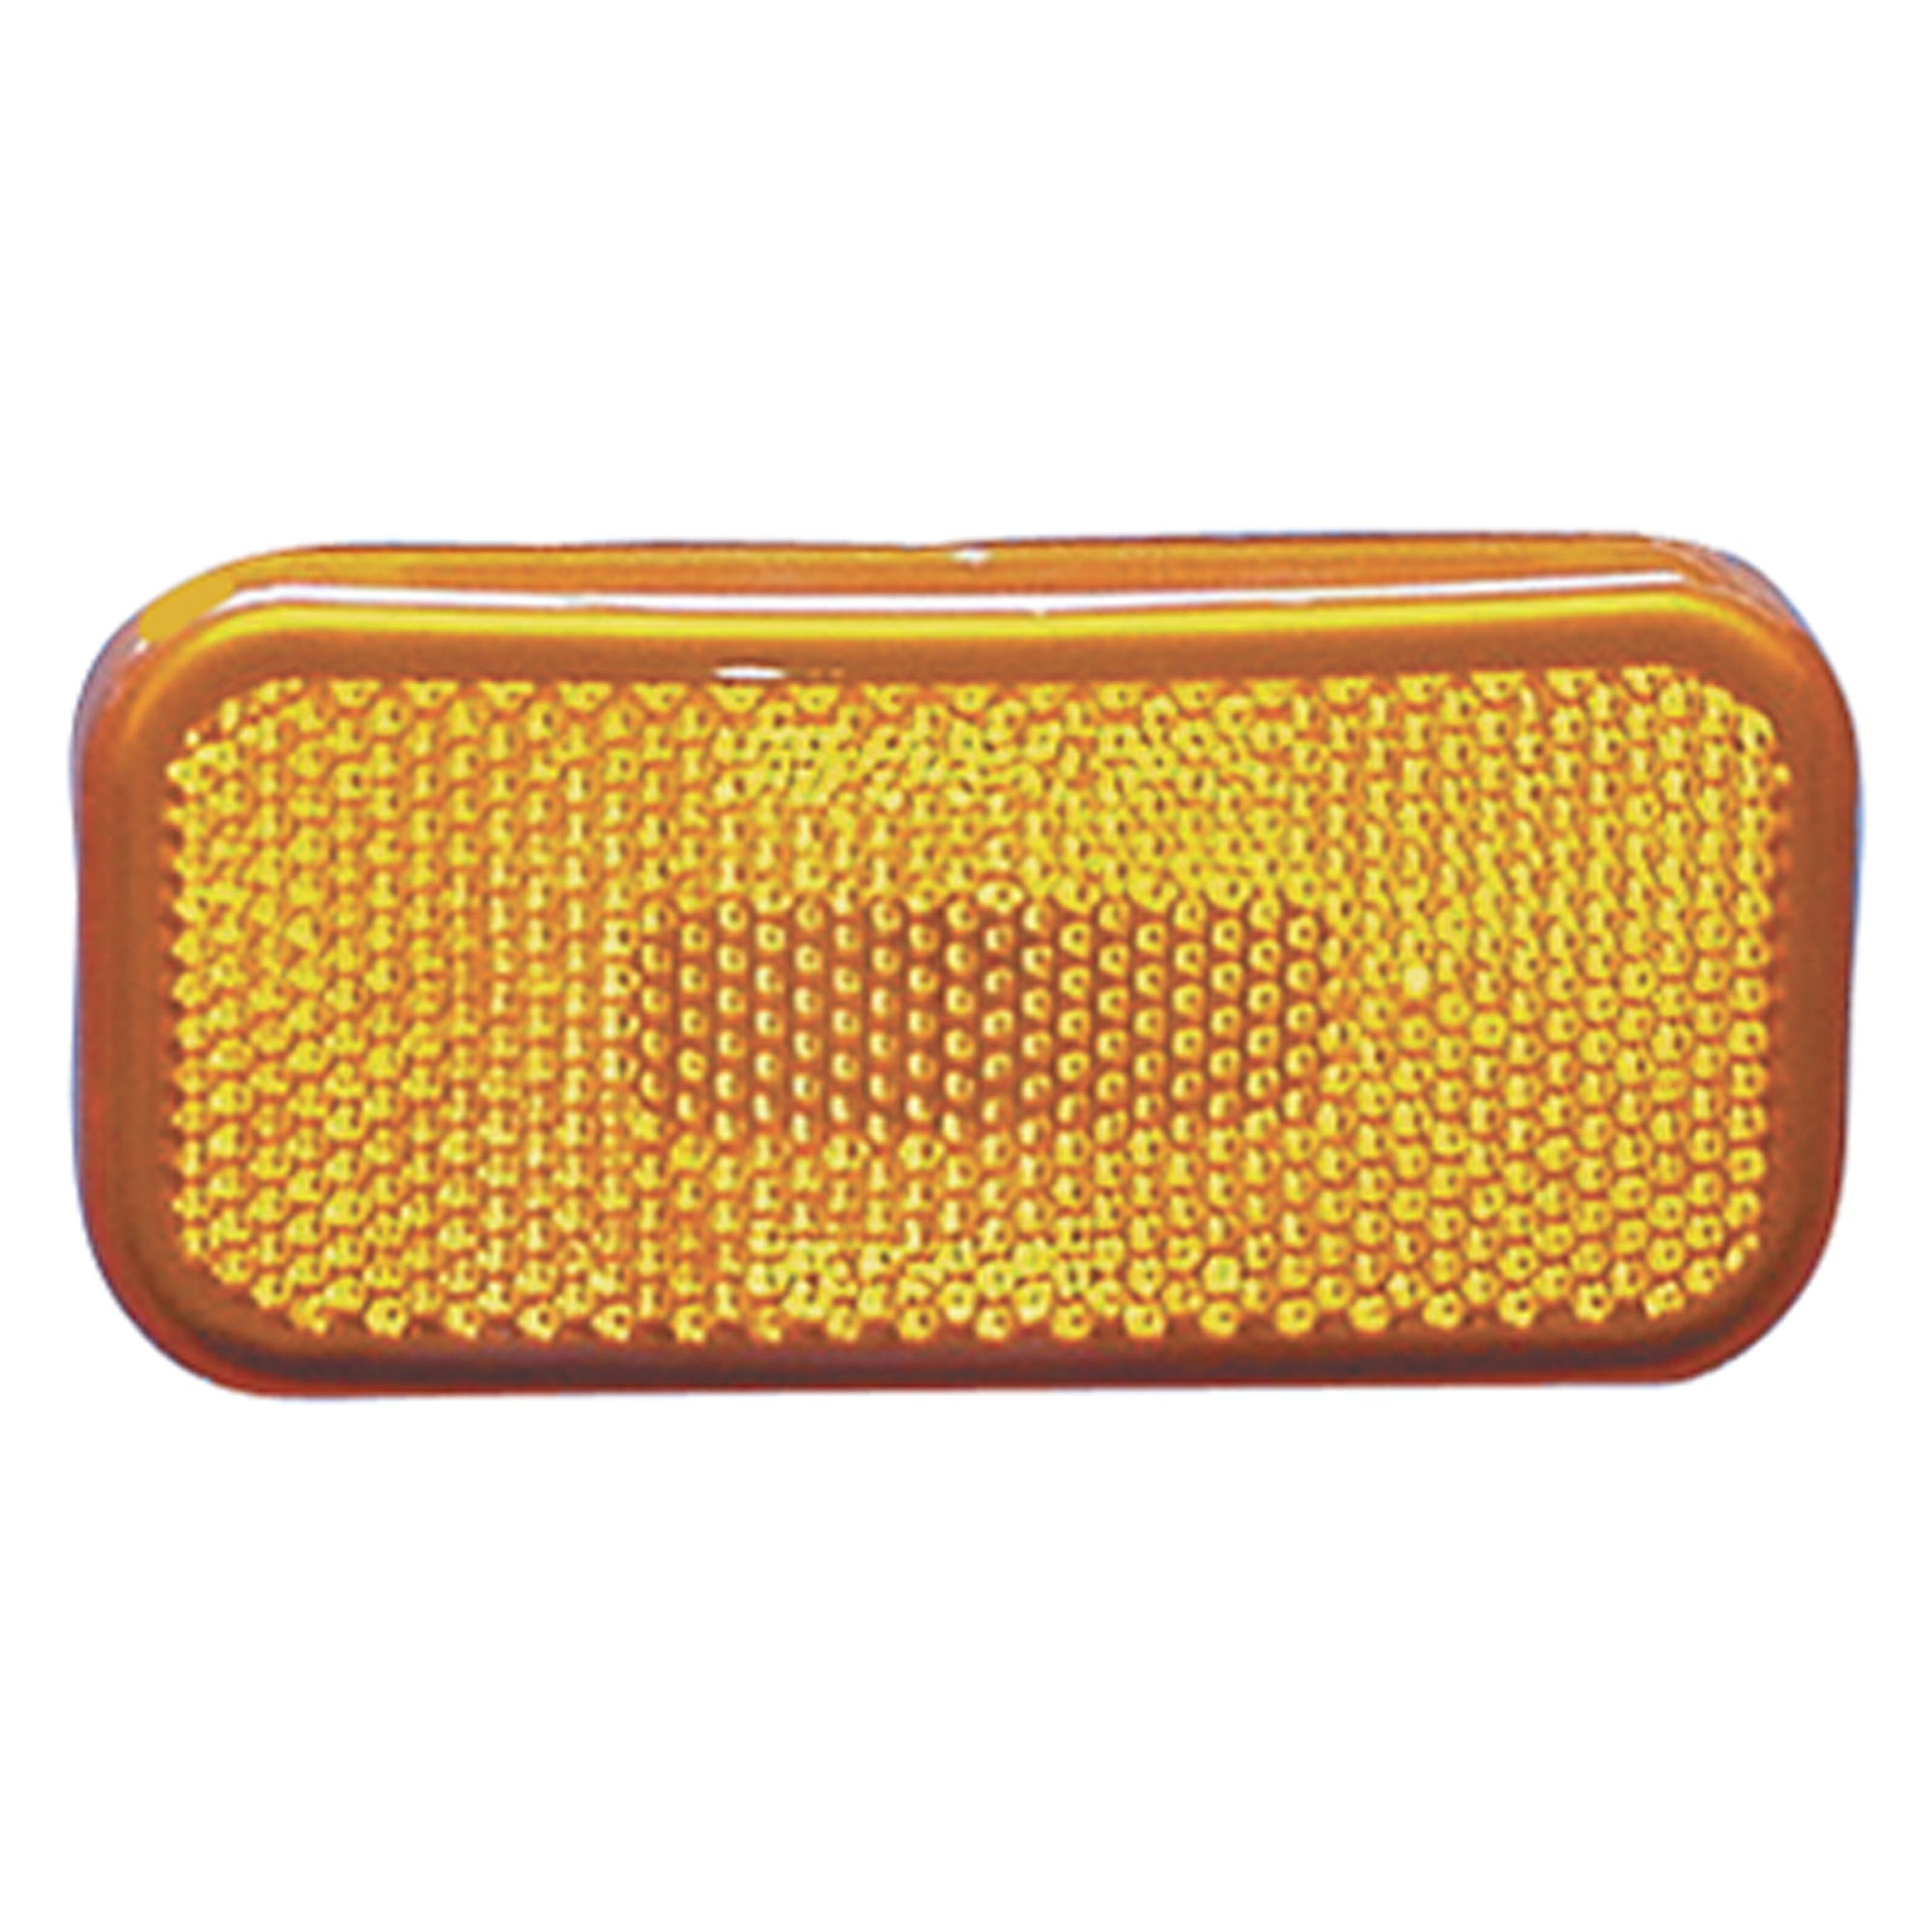 Fasteners Unlimited 89-237A Command Electronics Rounded Corner Clearance Light - Amber Replacement Lens